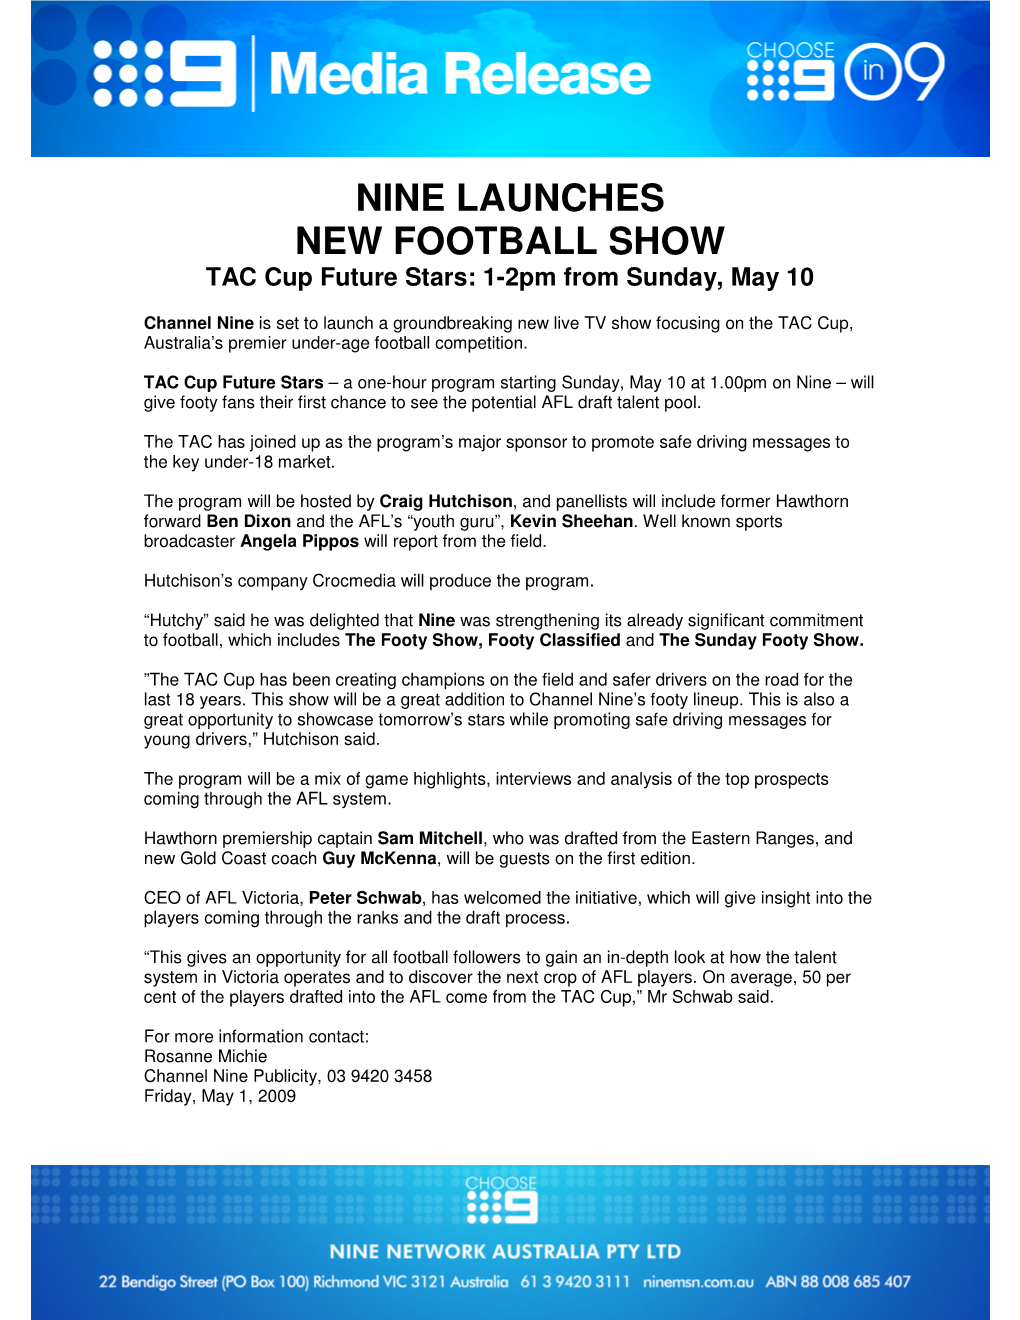 NINE LAUNCHES NEW FOOTBALL SHOW TAC Cup Future Stars: 1-2Pm from Sunday, May 10